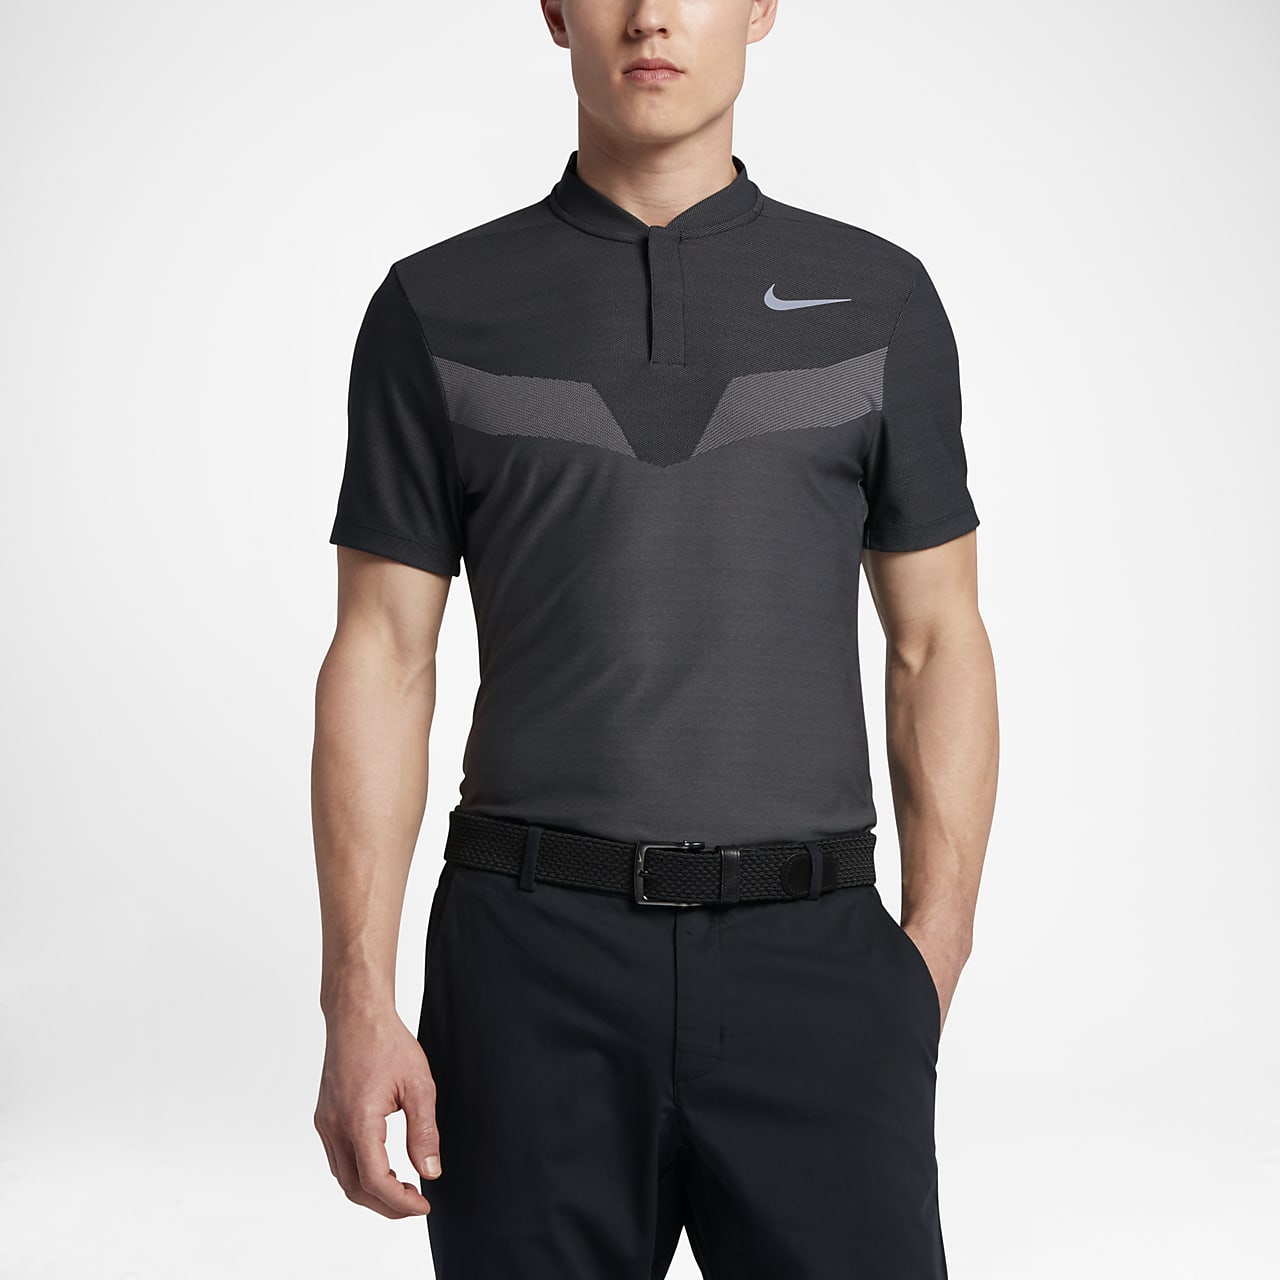 Zonal Cooling Slim Fit Golf Polo. MY